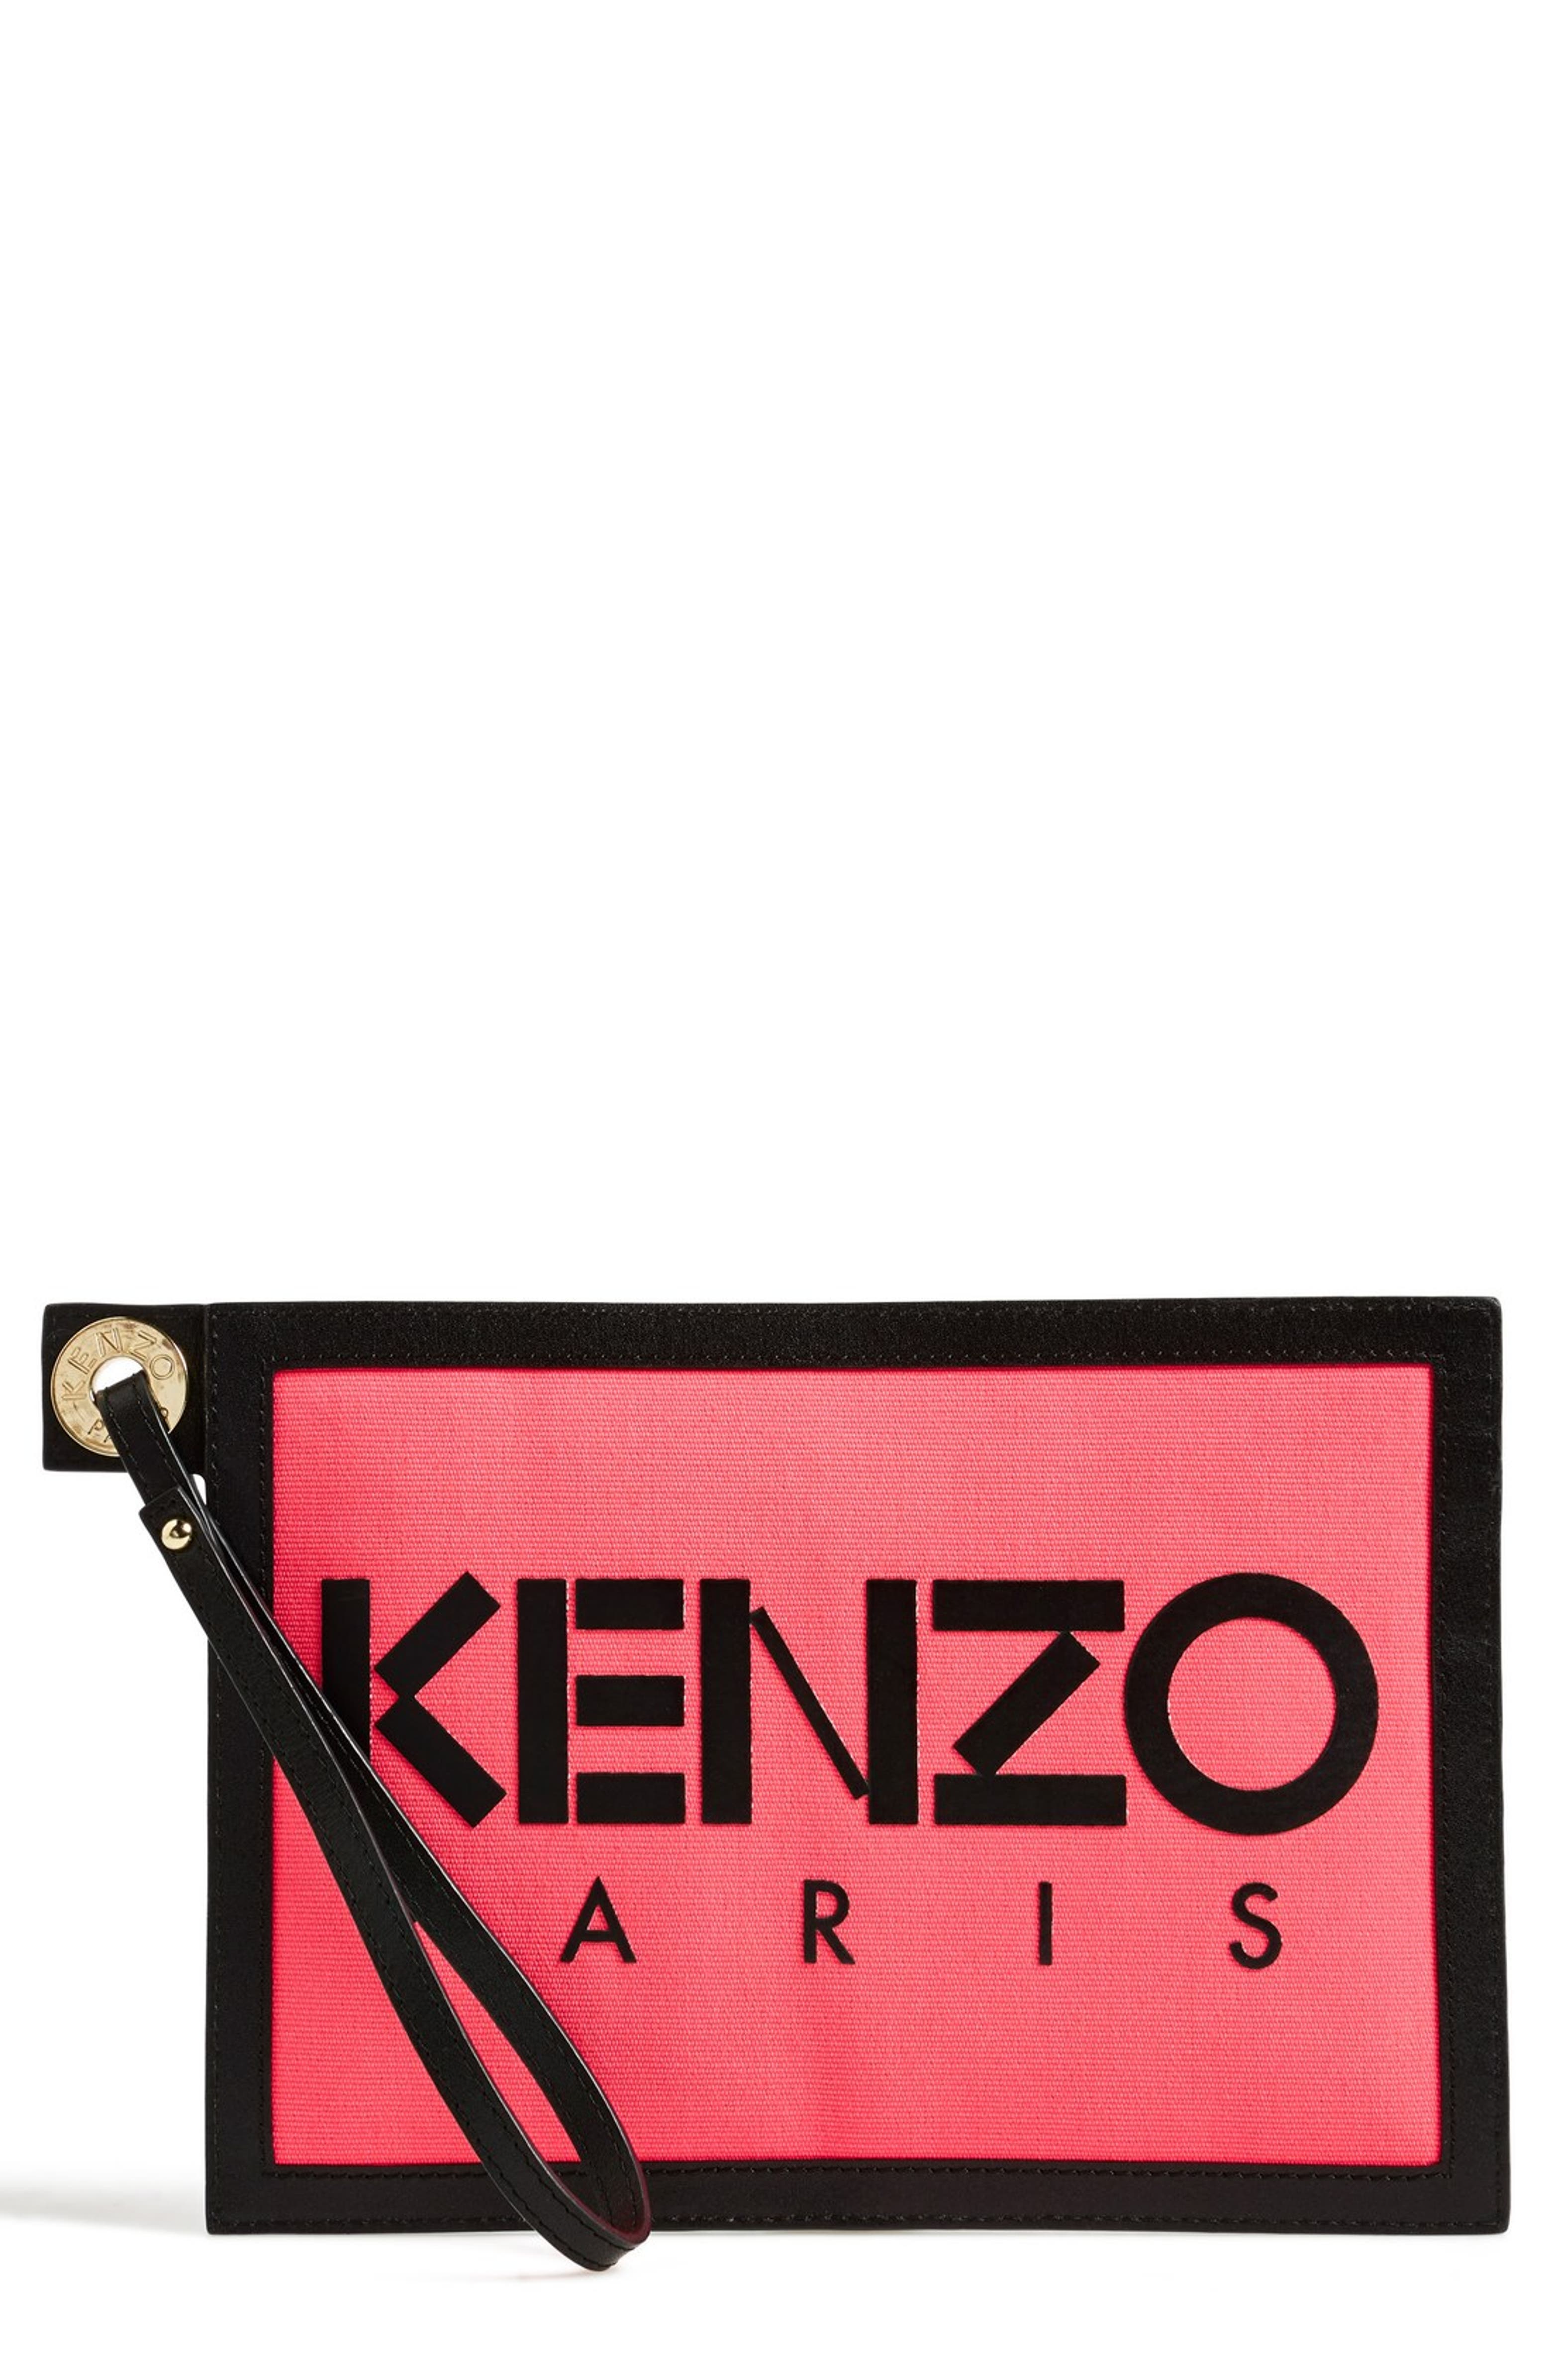 KENZO Canvas Pouch | Nordstrom